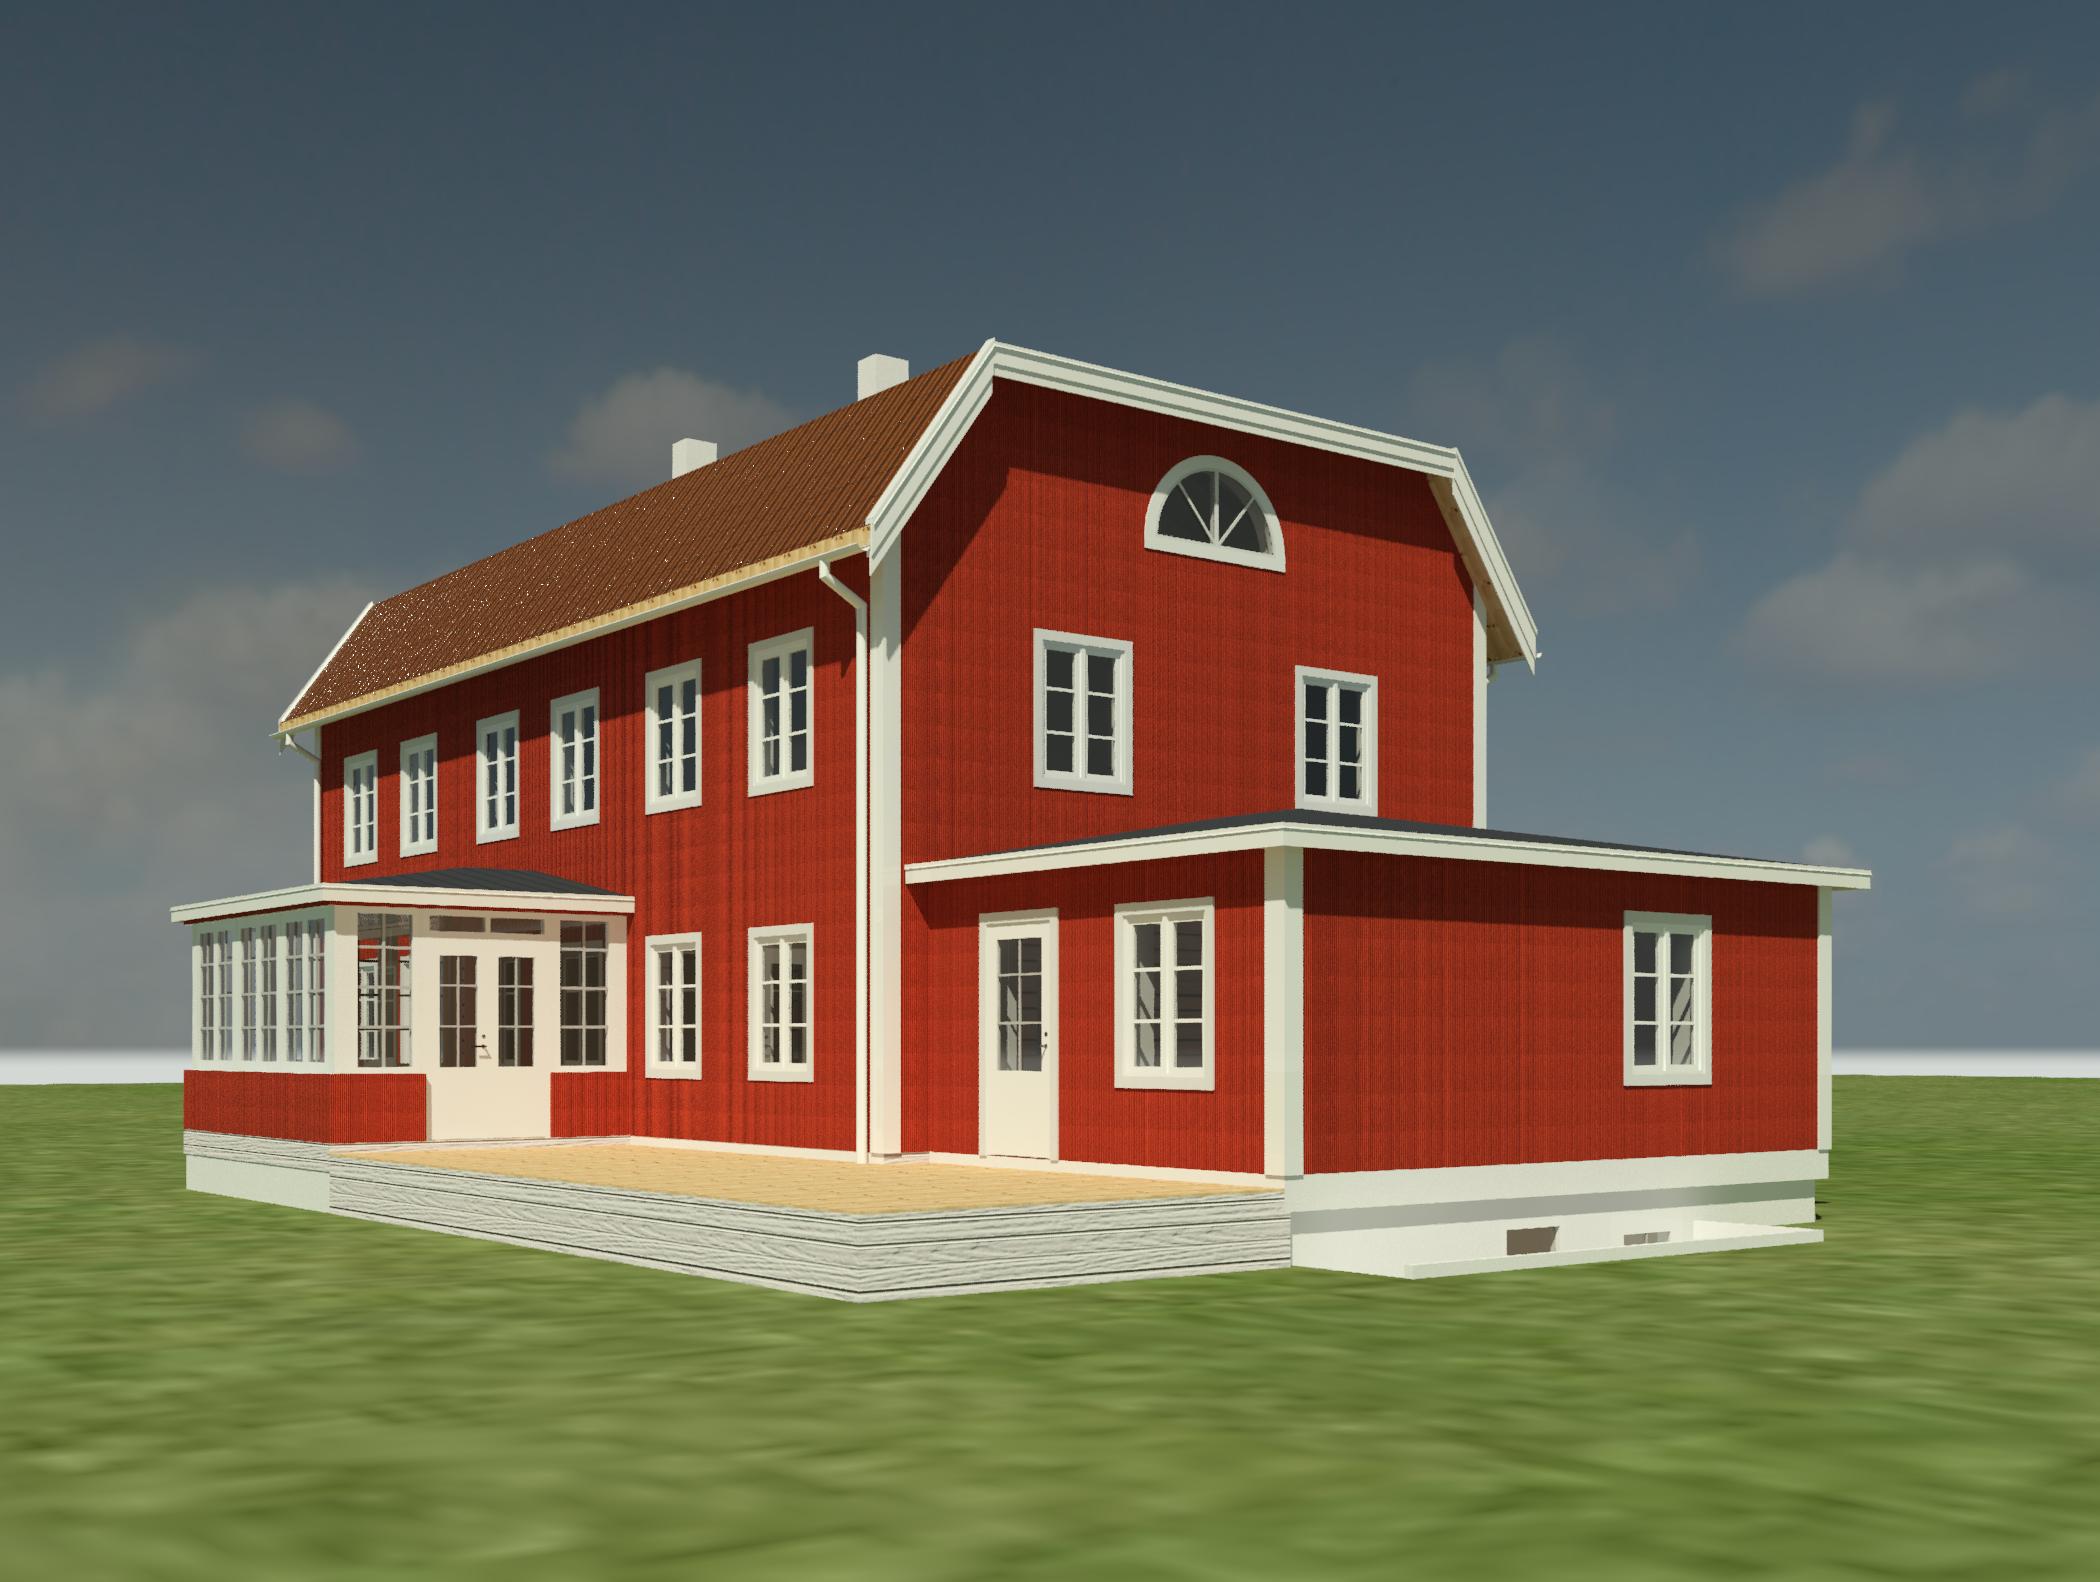 3D generated picture of a red wooden house